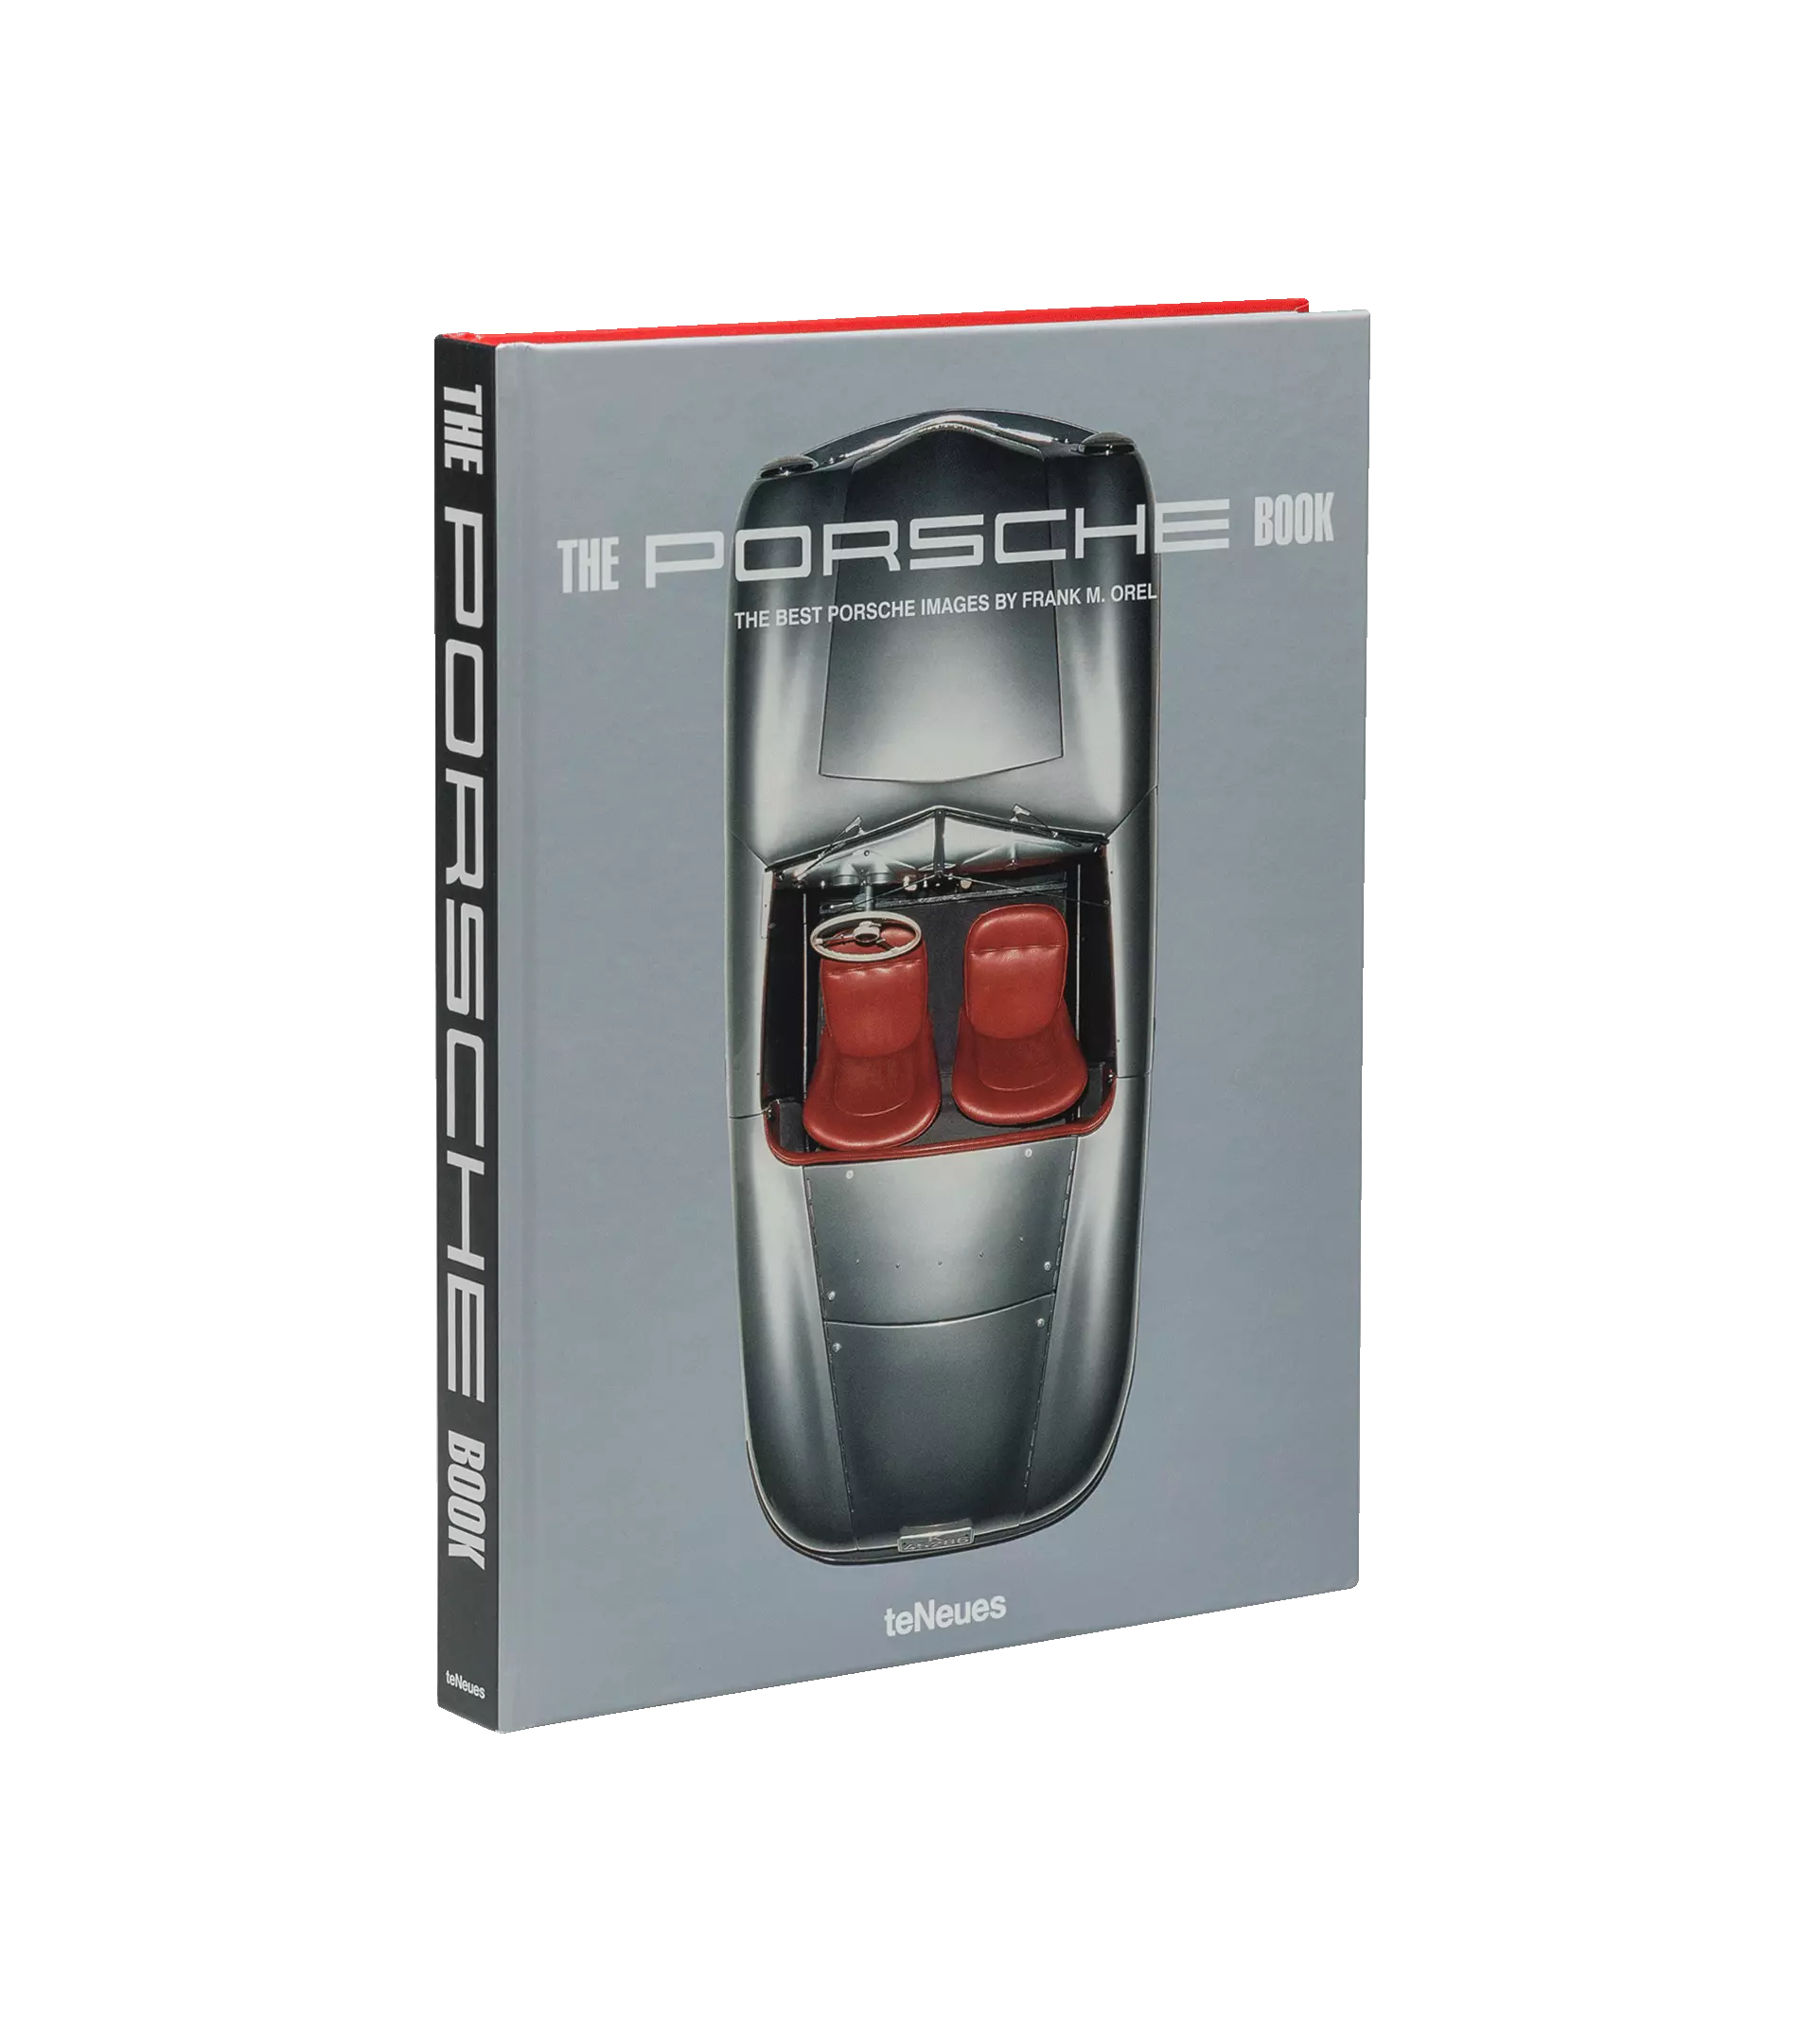 Cover of The Porsche Book by Frank M Orel